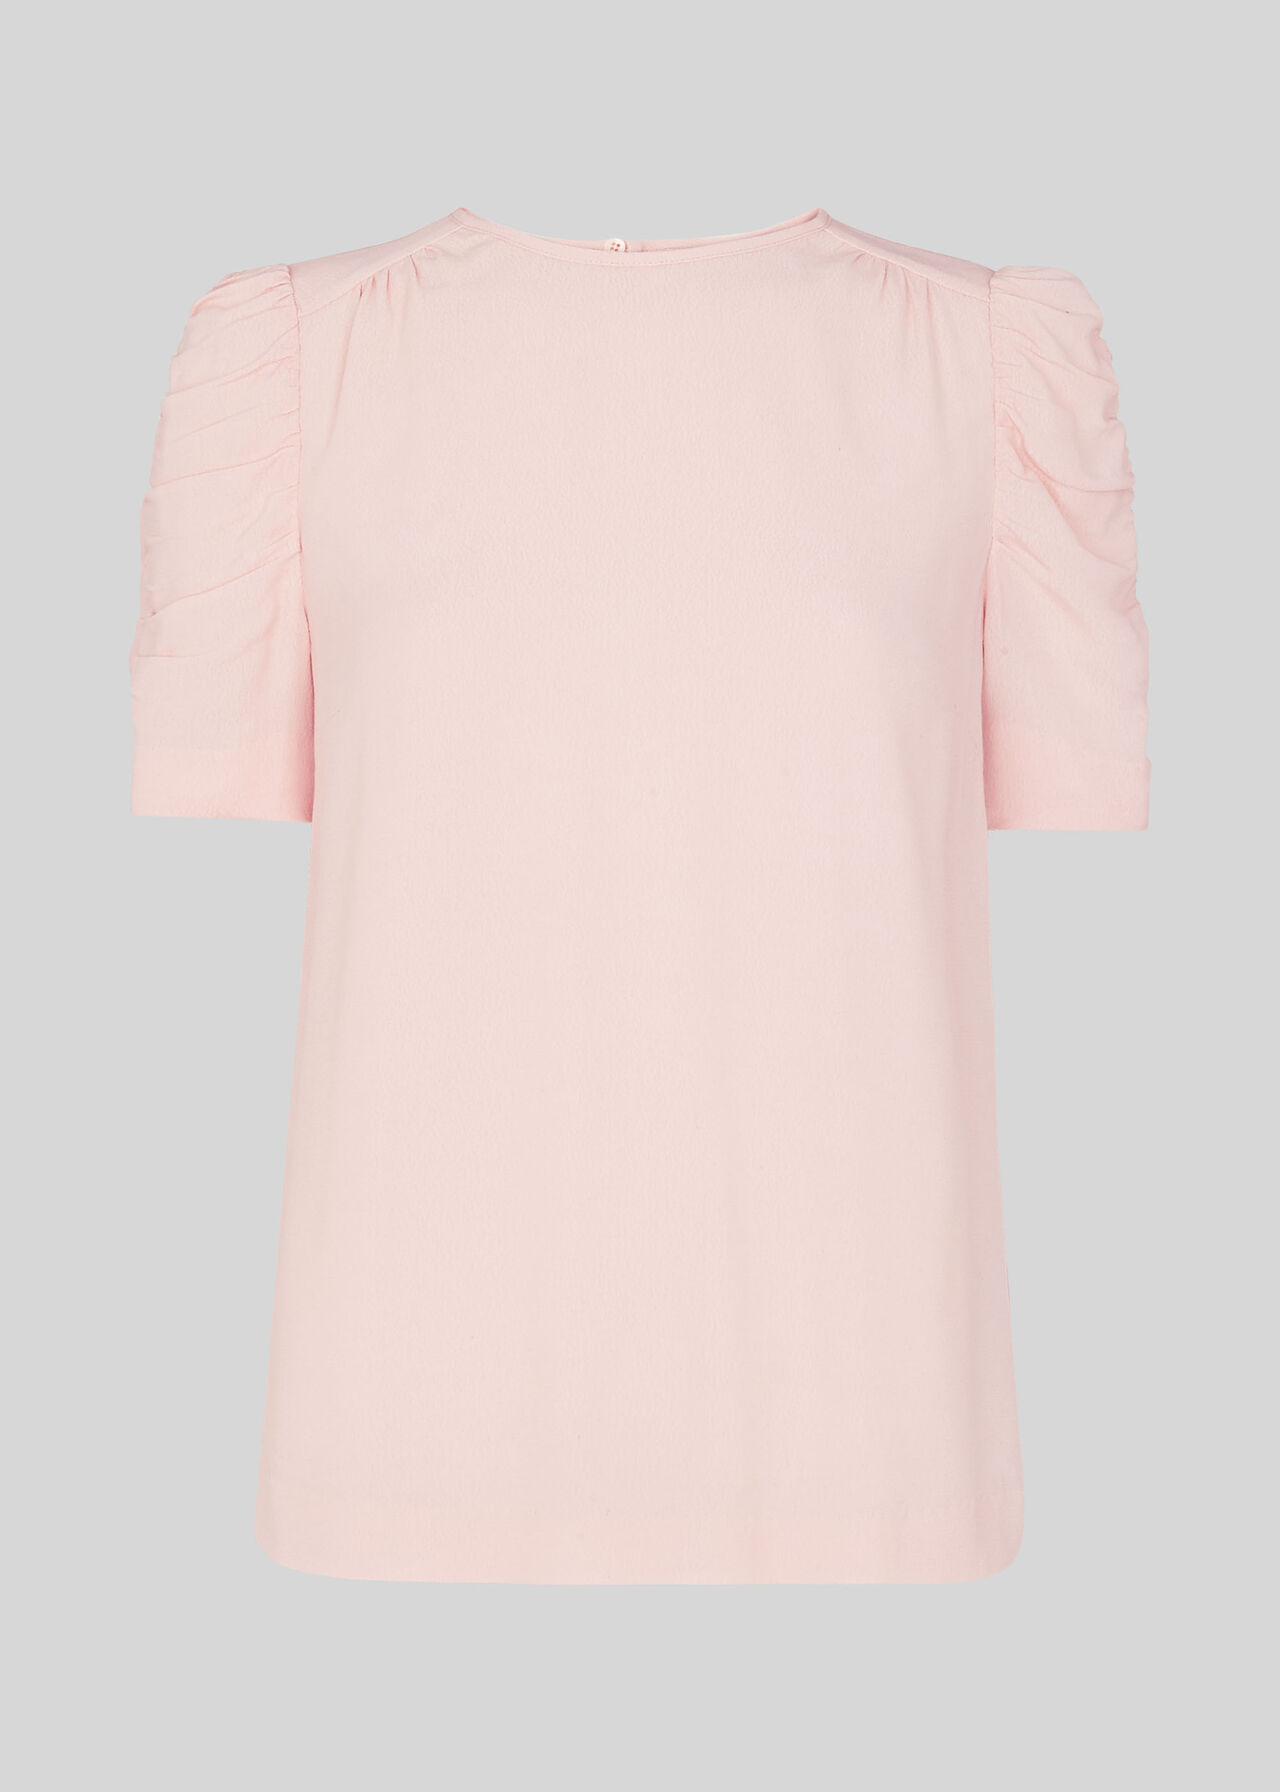 Pale Pink Nelly Shell Top | WHISTLES